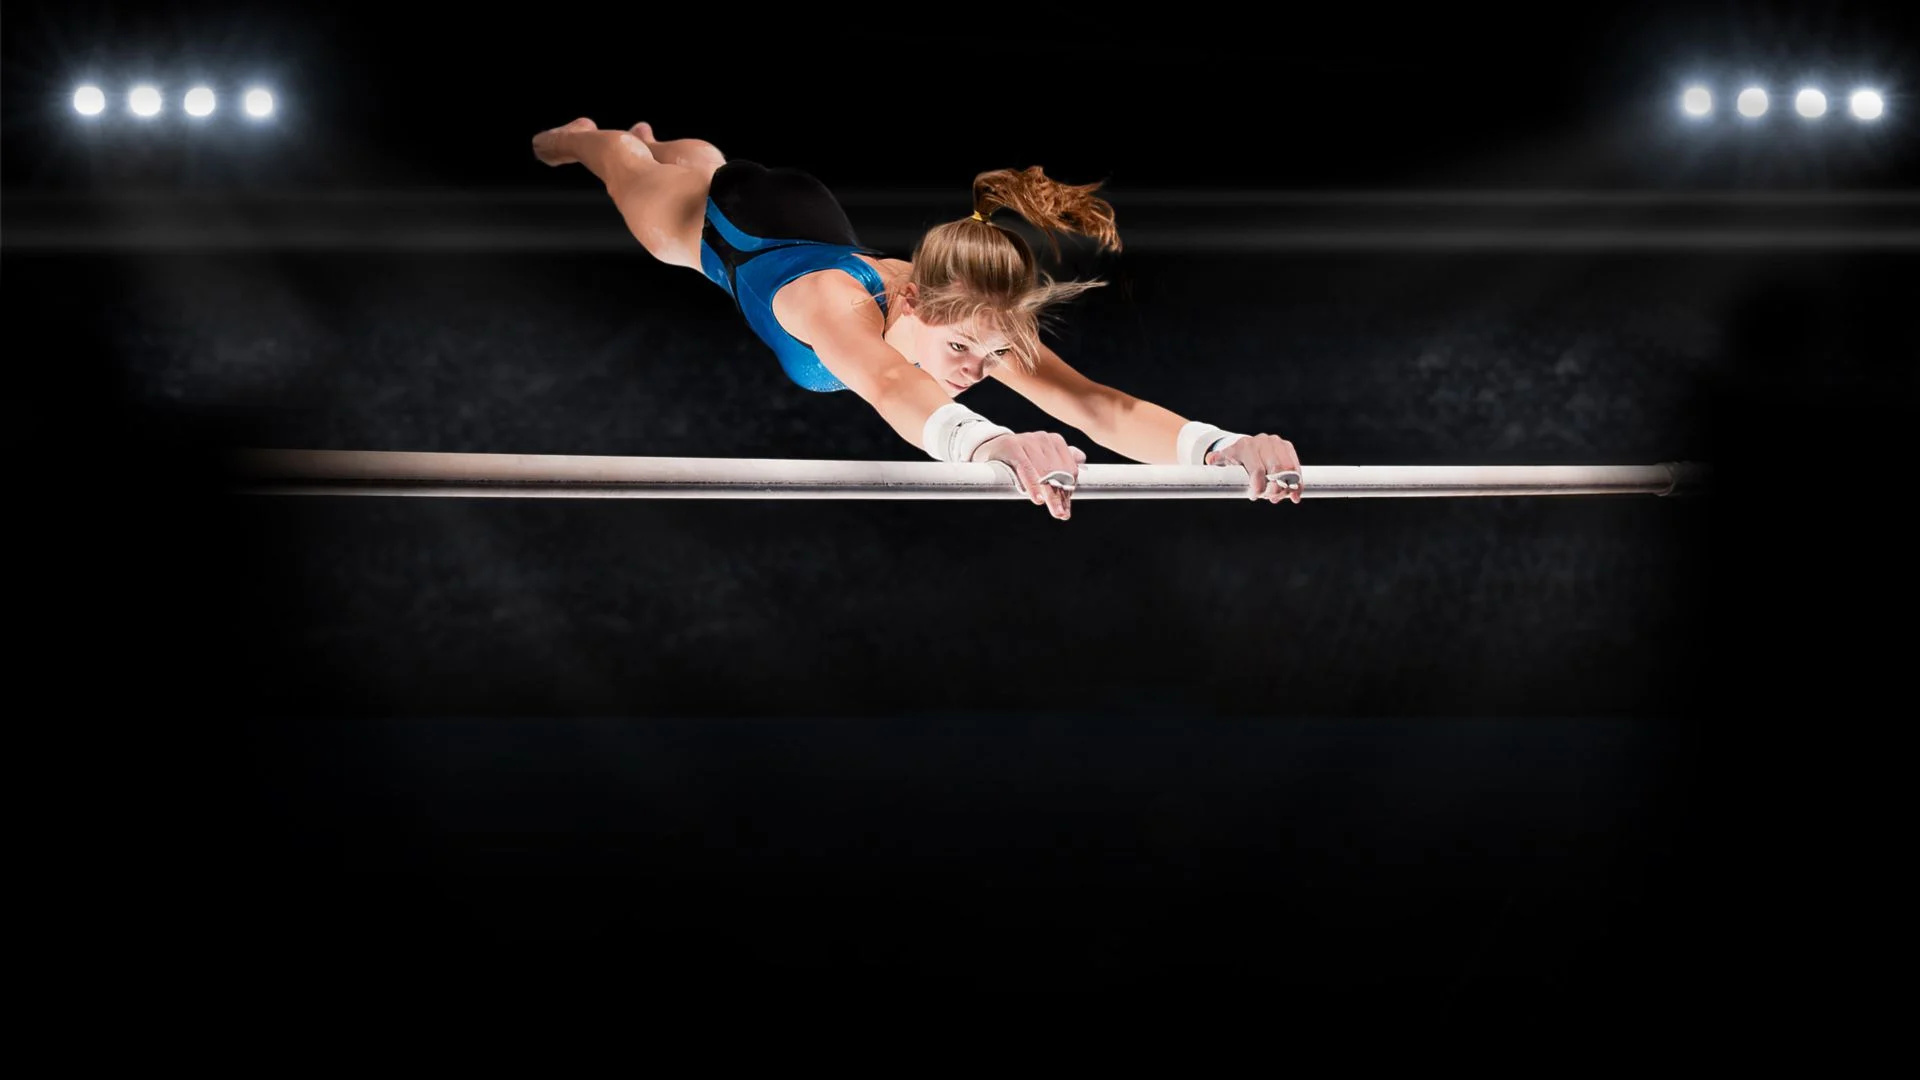 Horizontal Bar: Physical Exercises, Dedication and Endurance, Women's Championship, Competitive Sports, Female gymnast. 1920x1080 Full HD Wallpaper.